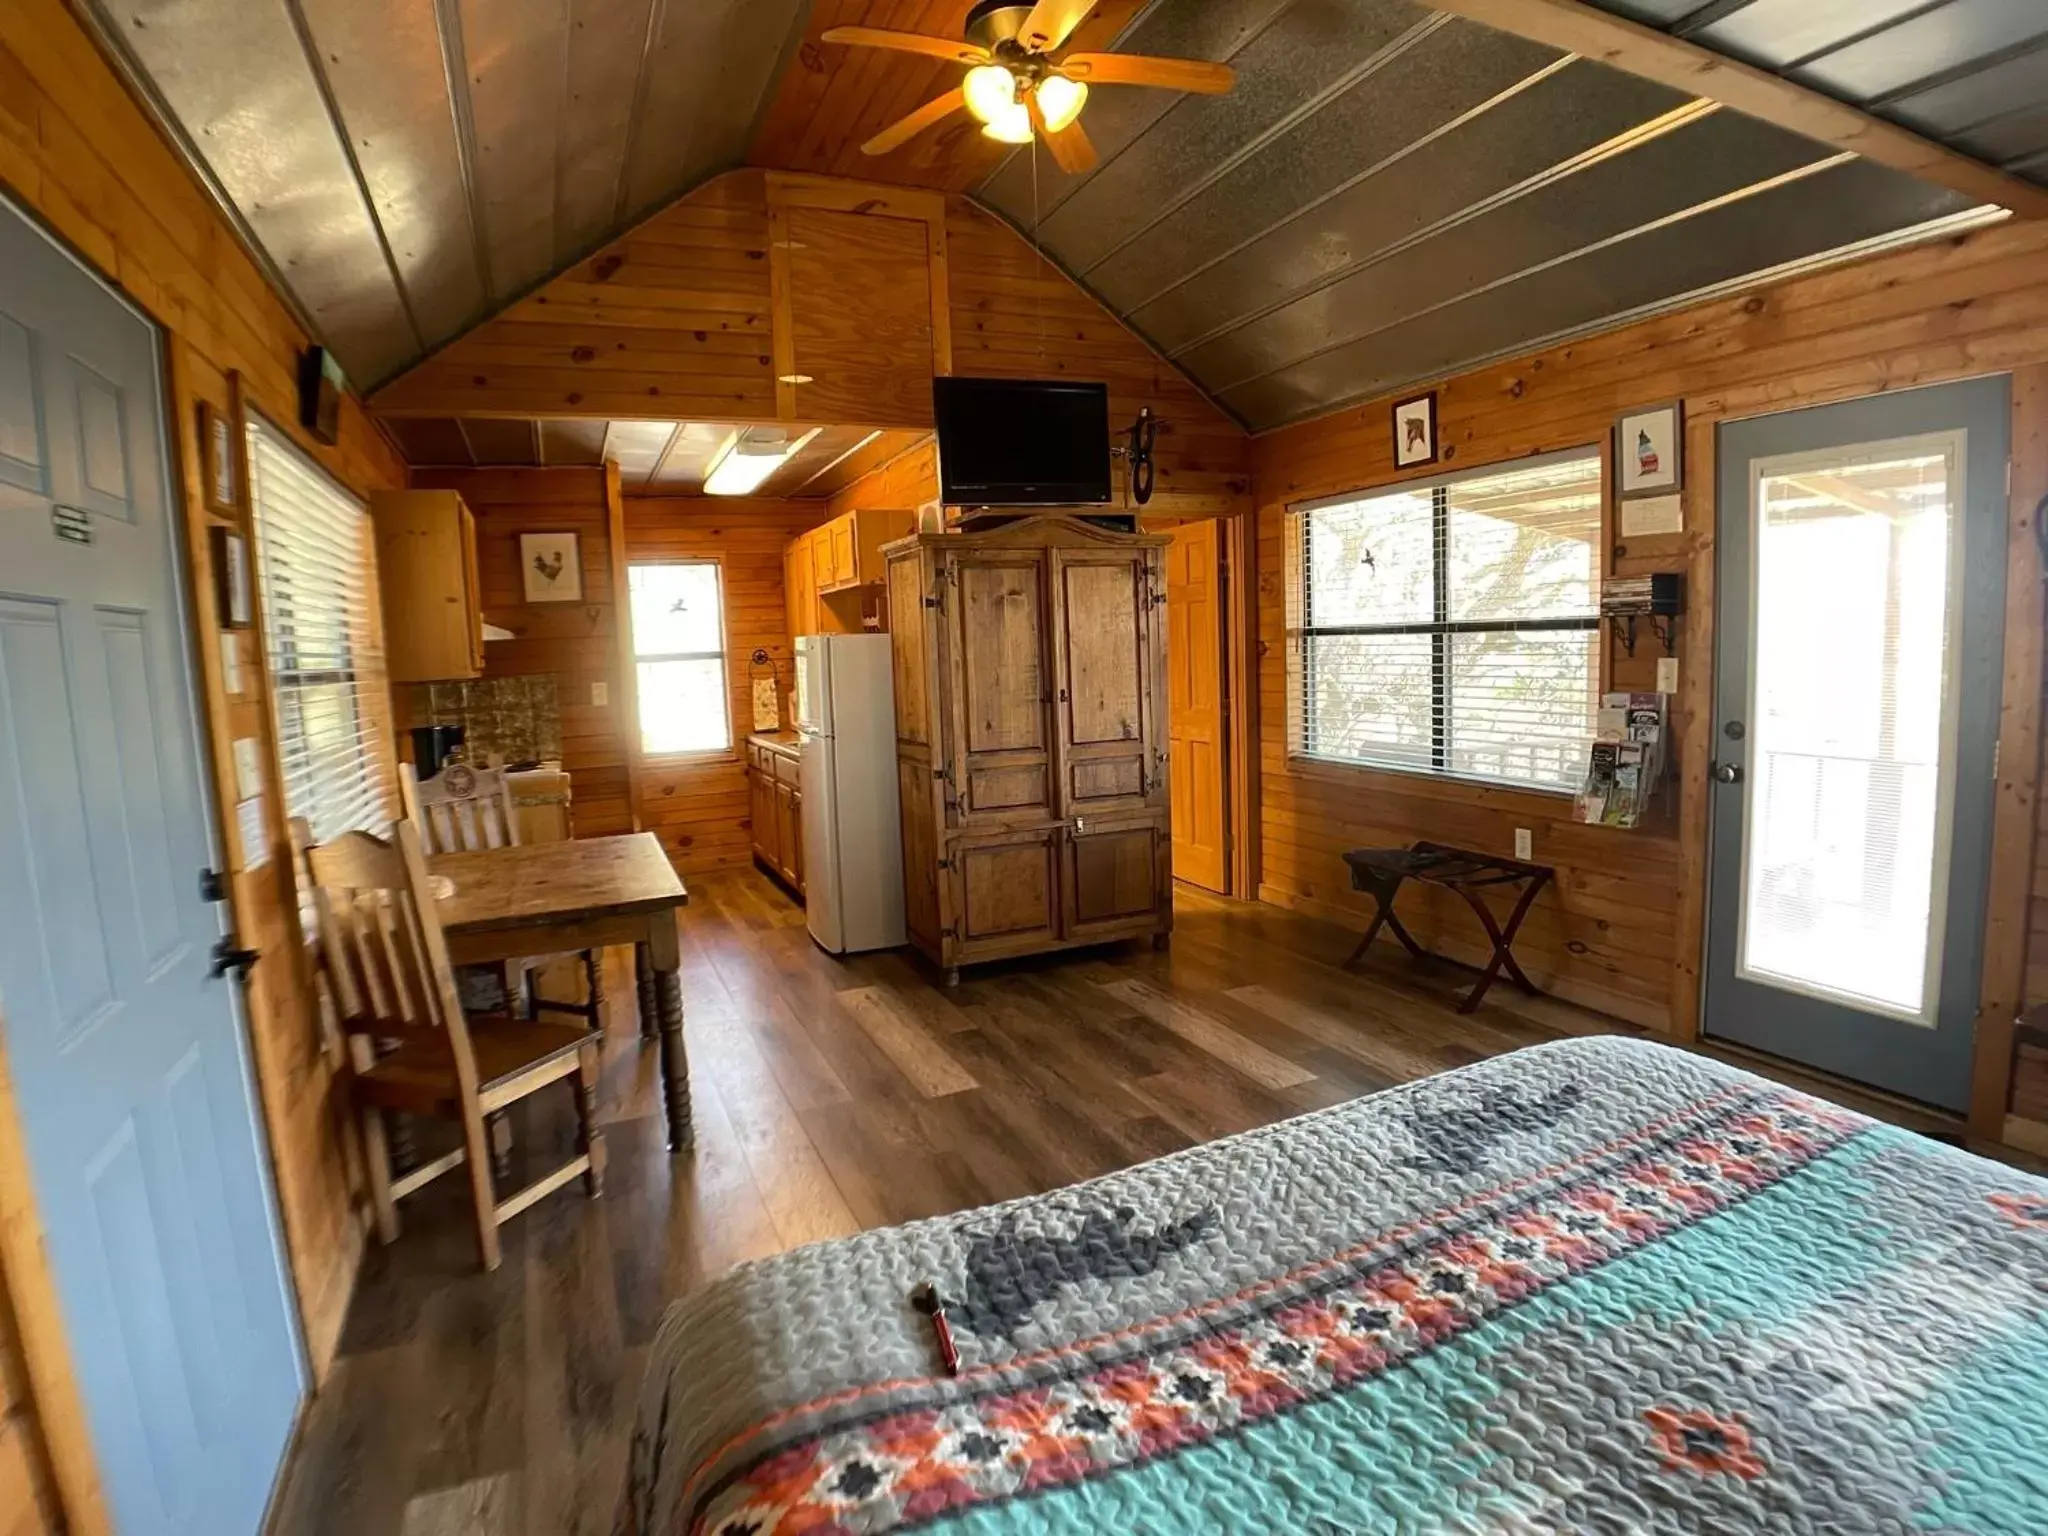 Living room in Walnut Canyon Cabins